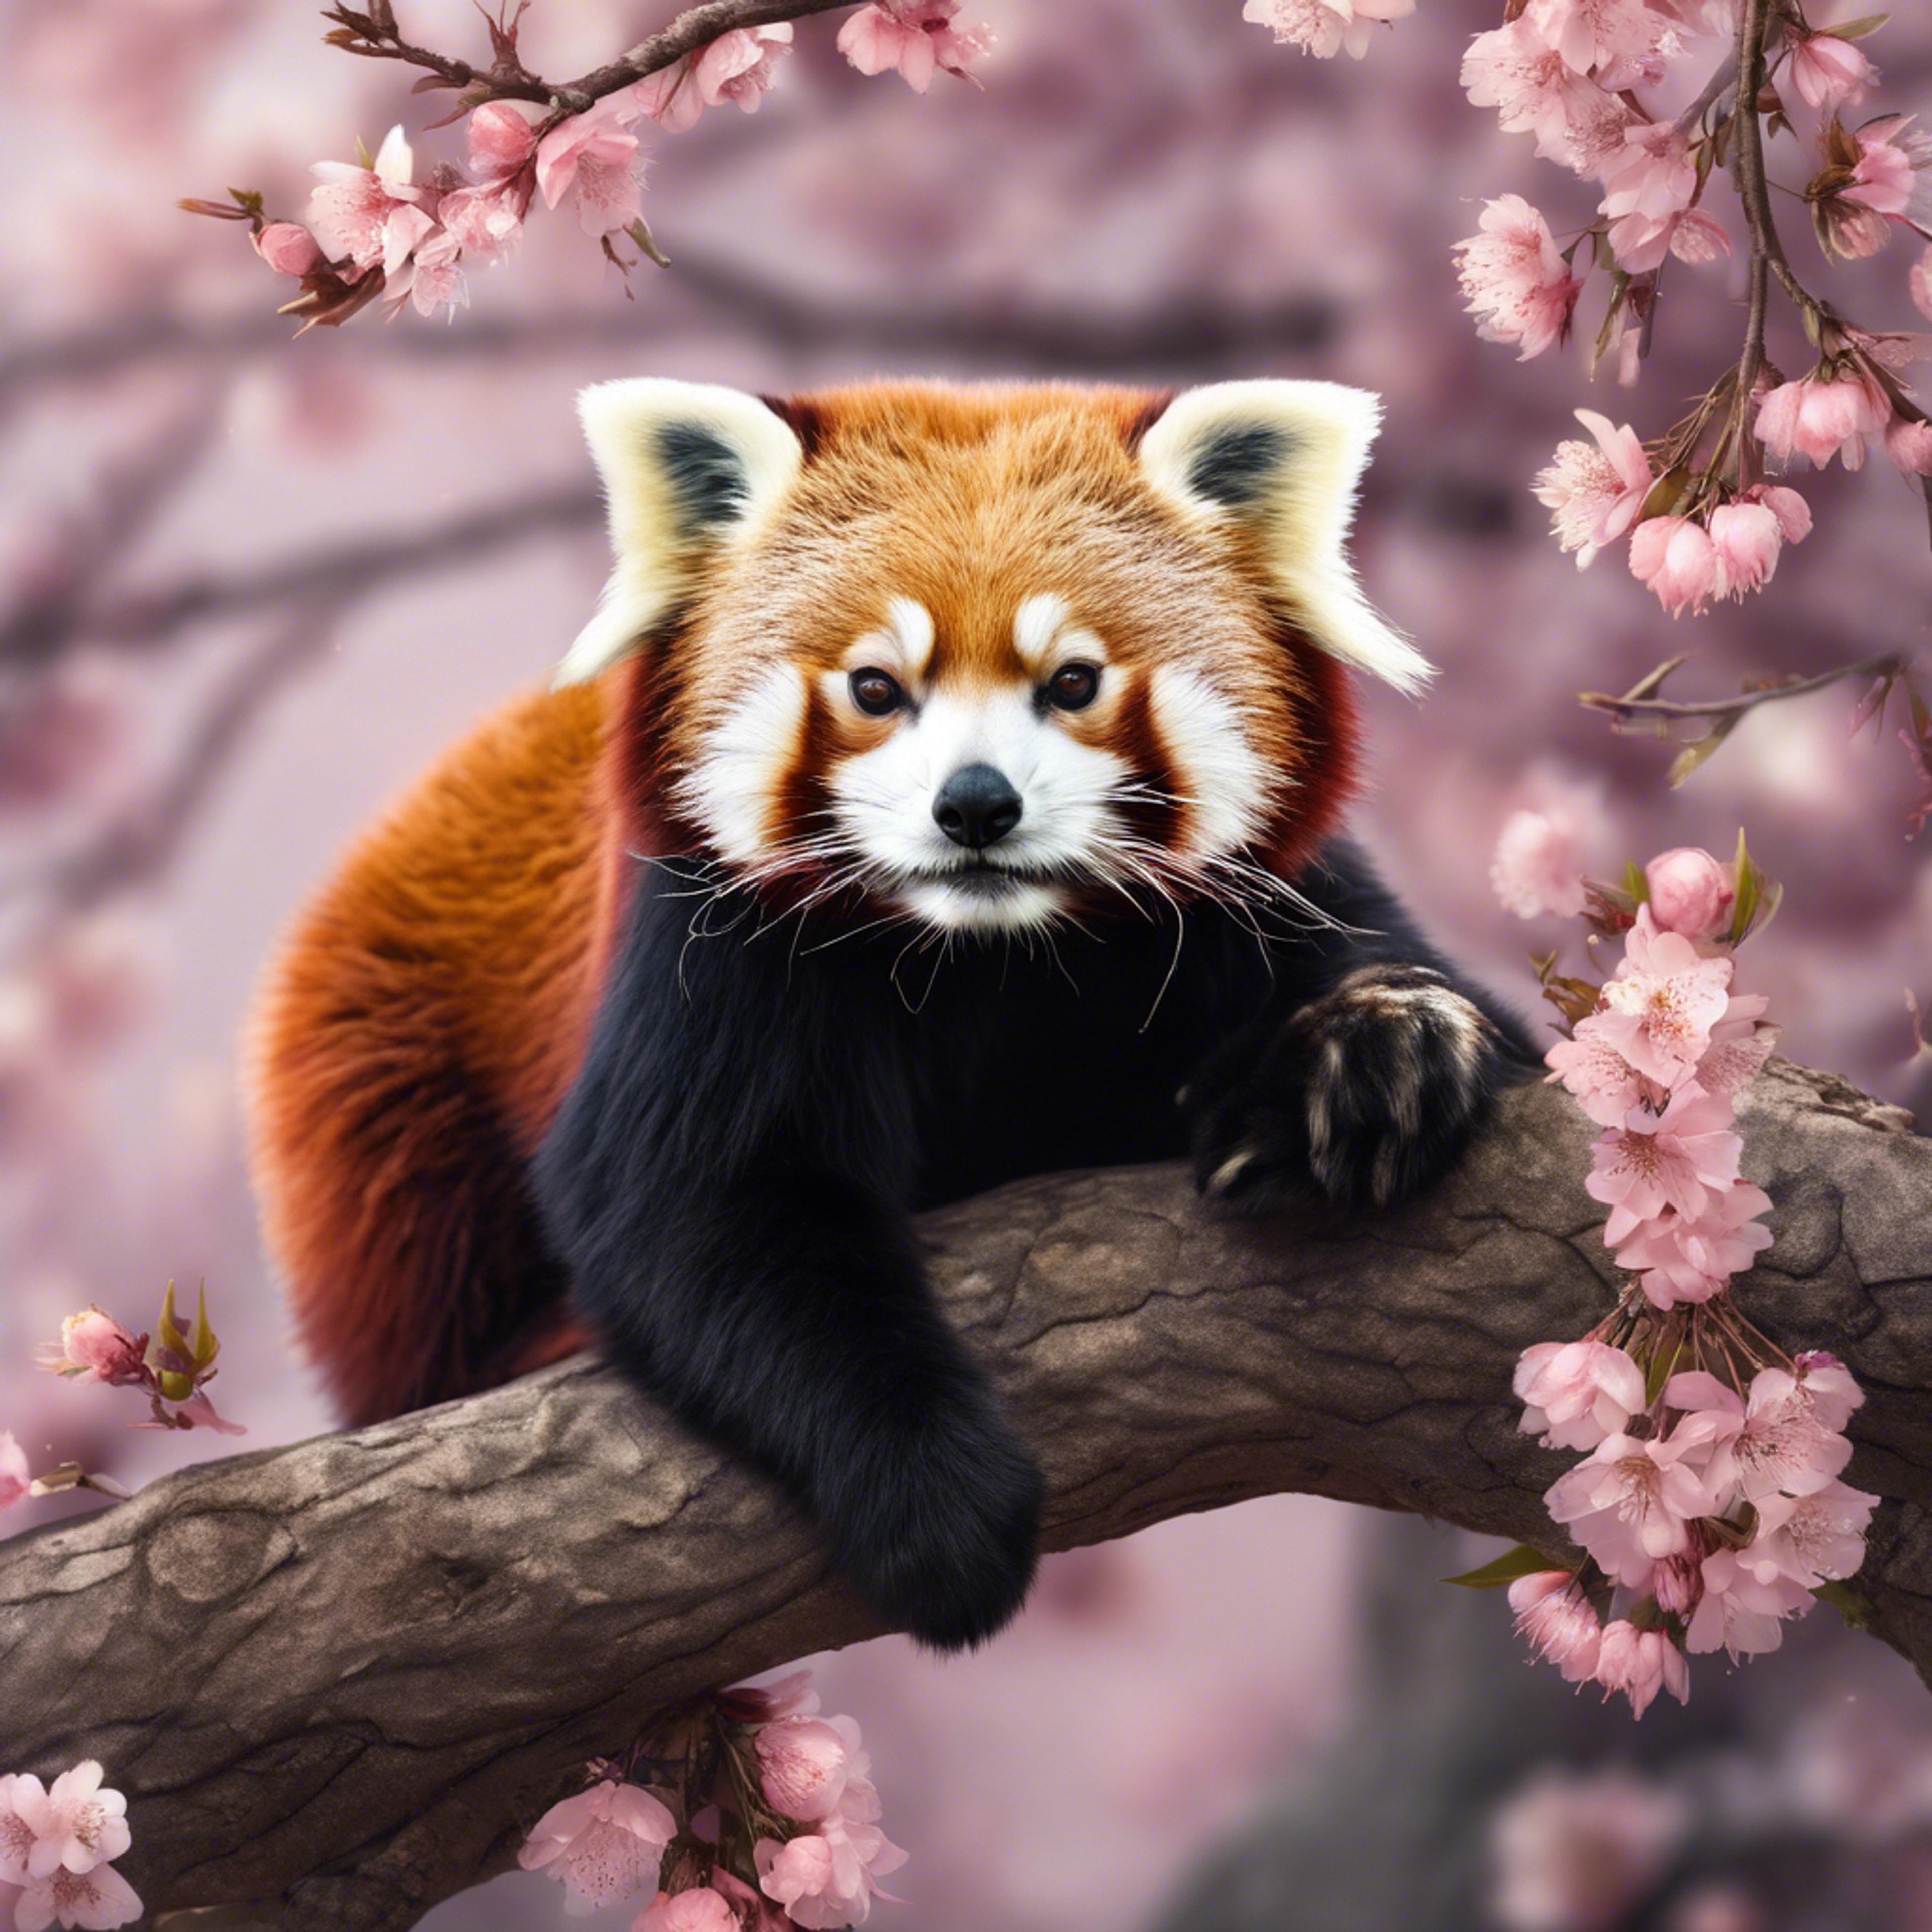 A red panda lounging lazily on a tree branch with a backdrop of blooming cherry blossoms. Дэлгэцийн зураг[422b6dc9464b43ba80b6]